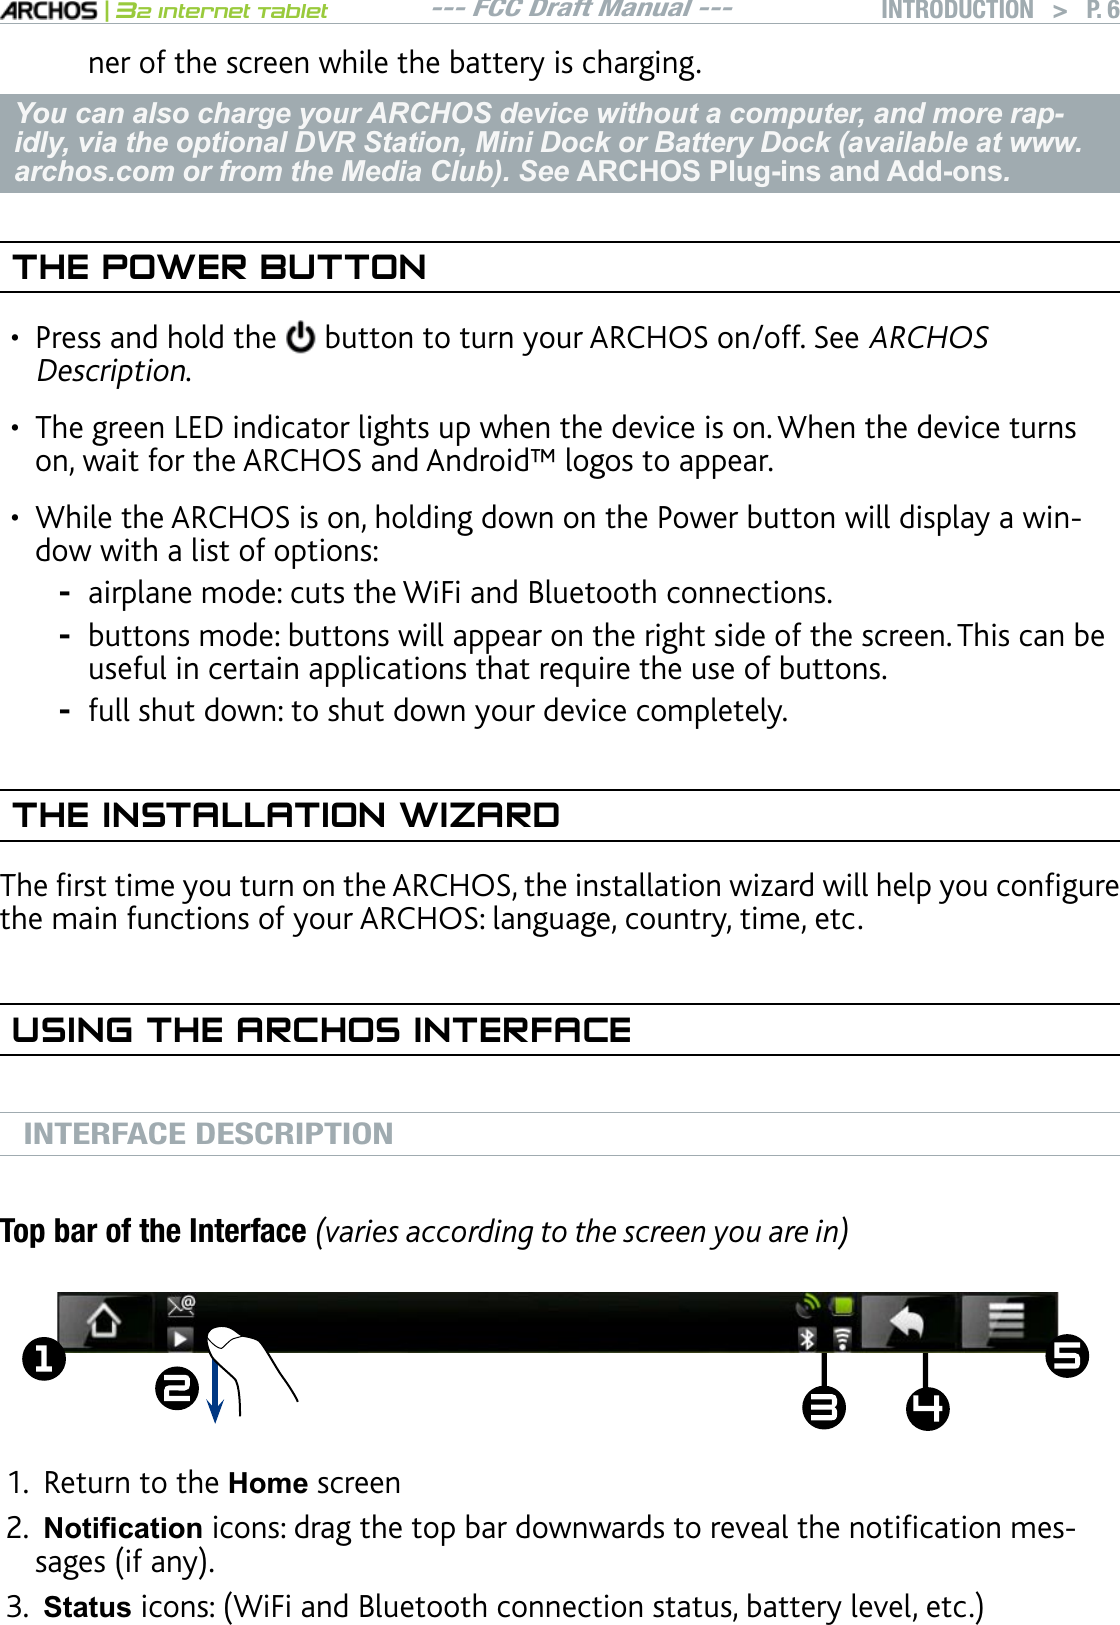 --- FCC Draft Manual ---|32 Internet TabletINTRODUCTION   &gt; P. 6ner of the screen while the battery is charging.You can also charge your ARCHOS device without a computer, and more rap-idly, via the optional DVR Station, Mini Dock or Battery Dock (available at www.archos.com or from the Media Club). See ARCHOS Plug-ins and Add-ons.THE POWER BUTTONPress and hold the  button to turn your ARCHOS on/off. See ARCHOSDescription. The green LED indicator lights up when the device is on. When the device turns on, wait for the ARCHOS and Android™ logos to appear.While the ARCHOS is on, holding down on the Power button will display a window with a list of options:airplane mode: cuts the WiFi and Bluetooth connections. buttons mode: buttons will appear on the right side of the screen. This can be useful in certain applications that require the use of buttons.full shut down: to shut down your device completely. THE INSTALLATION WIZARD6JGÒTUVVKOG[QWVWTPQPVJG#4%*15VJGKPUVCNNCVKQPYK\CTFYKNNJGNR[QWEQPÒIWTGthe main functions of your ARCHOS: language, country, time, etc. USING THE ARCHOS INTERFACEINTERFACE DESCRIPTIONTop bar of the Interface (varies according to the screen you are in)ź ź Return to the Home screen1RWL¿FDWLRQKEQPUFTCIVJGVQRDCTFQYPYCTFUVQTGXGCNVJGPQVKÒECVKQPOGUUCIGUKHCP[StatusKEQPU9K(KCPF$NWGVQQVJEQPPGEVKQPUVCVWUDCVVGT[NGXGNGVE•••---1.2.3.